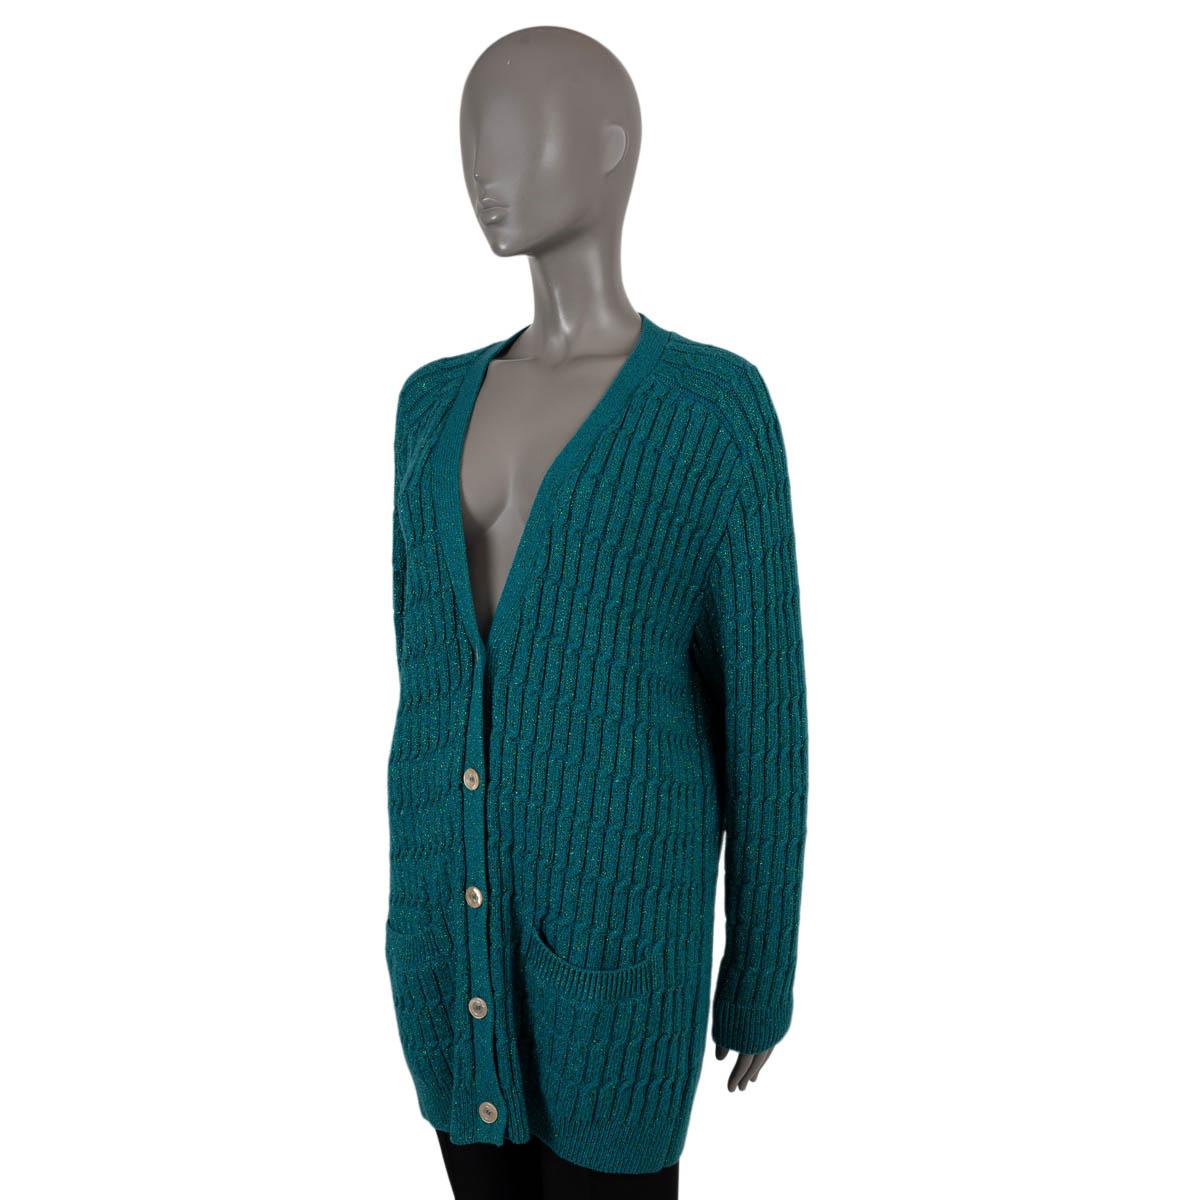 100% authentic Gucci oversized, long glitter v-neck cable knit cardigan in petrol wool (35%), viscose (26%), polyamide (24%), cashmere (9%) and metallized polyester (6%). The design features two front pockets and opens with five nude shiny buttons.